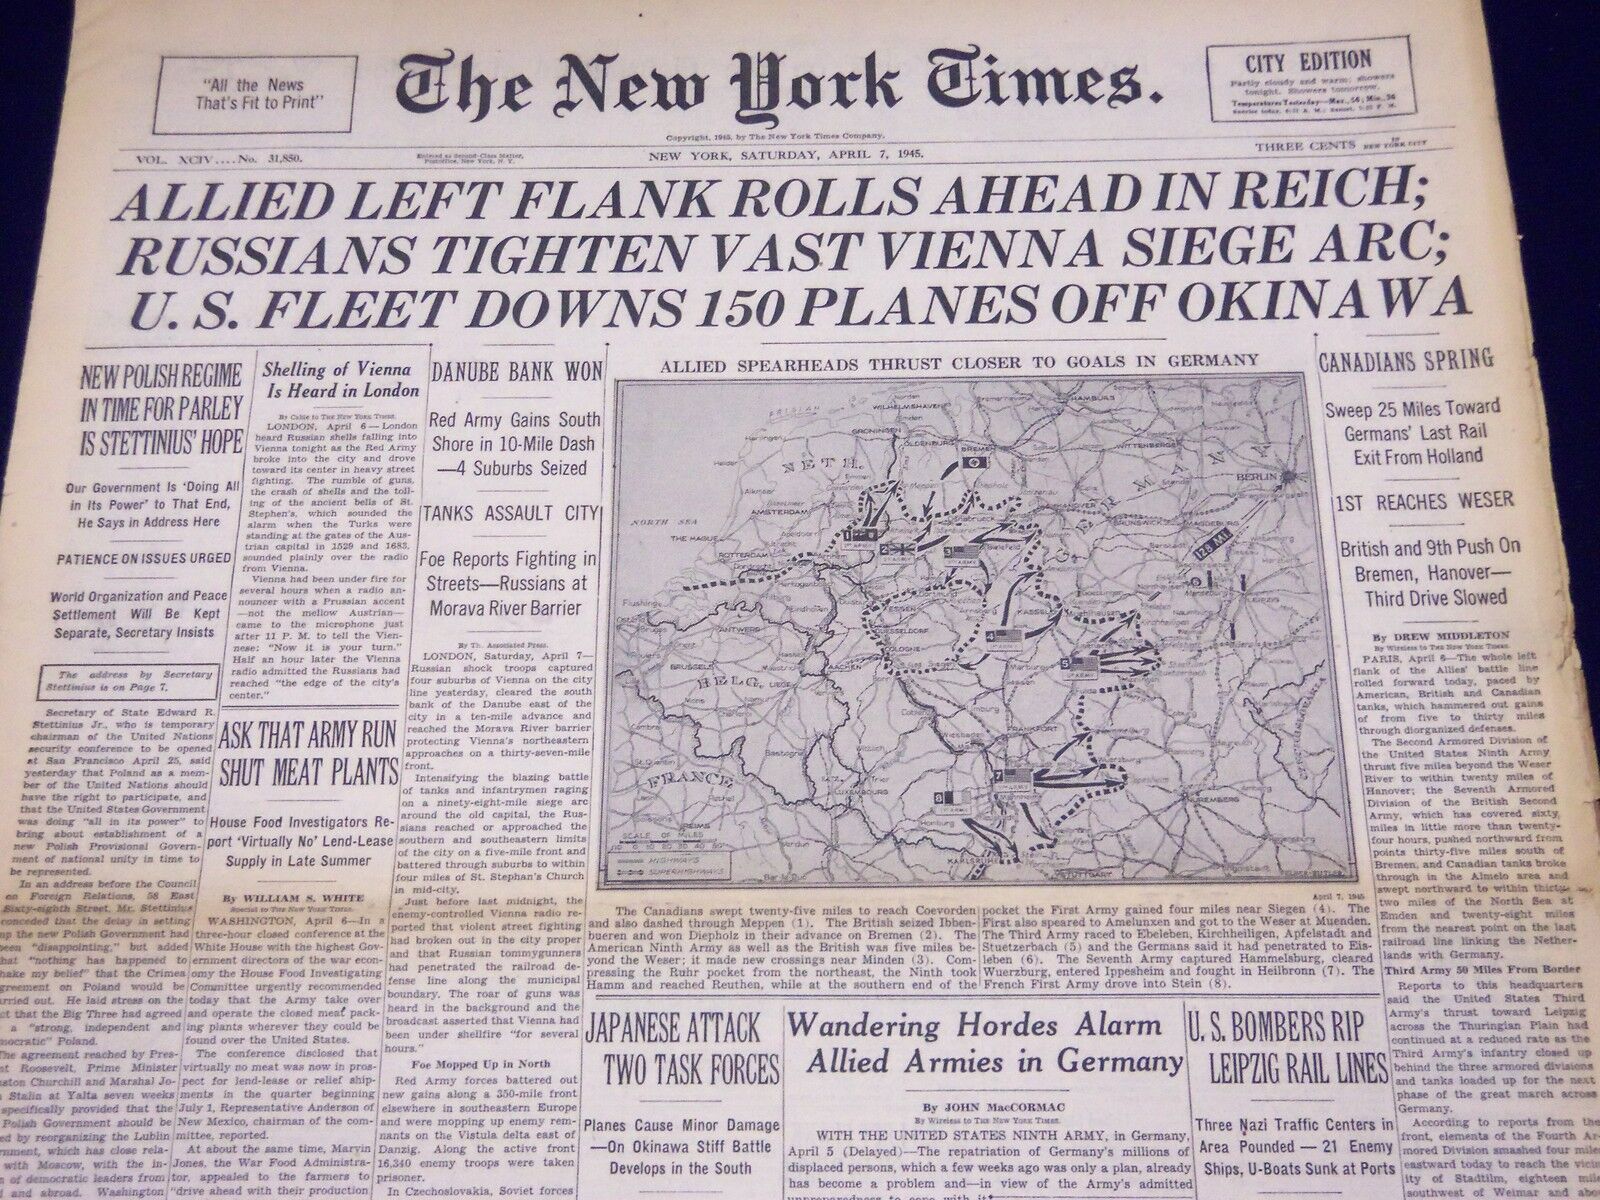 1945 APR 7 NEW YORK TIMES - ALLIED LEFT FLANK ROLLS AHEAD IN REICH - NT 371